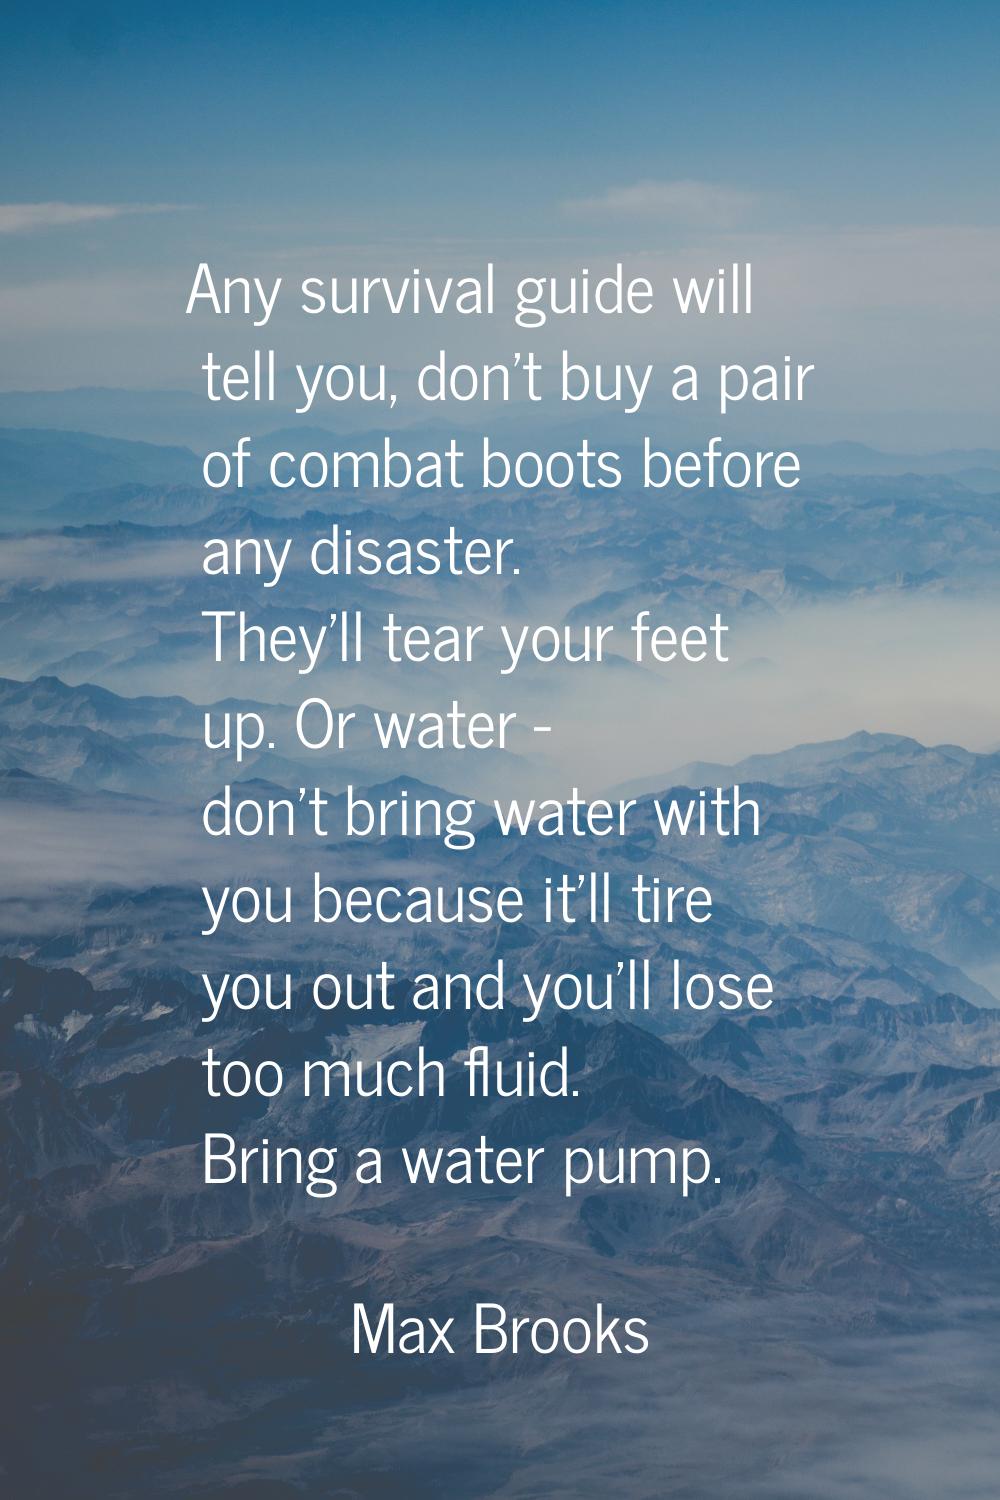 Any survival guide will tell you, don't buy a pair of combat boots before any disaster. They'll tea